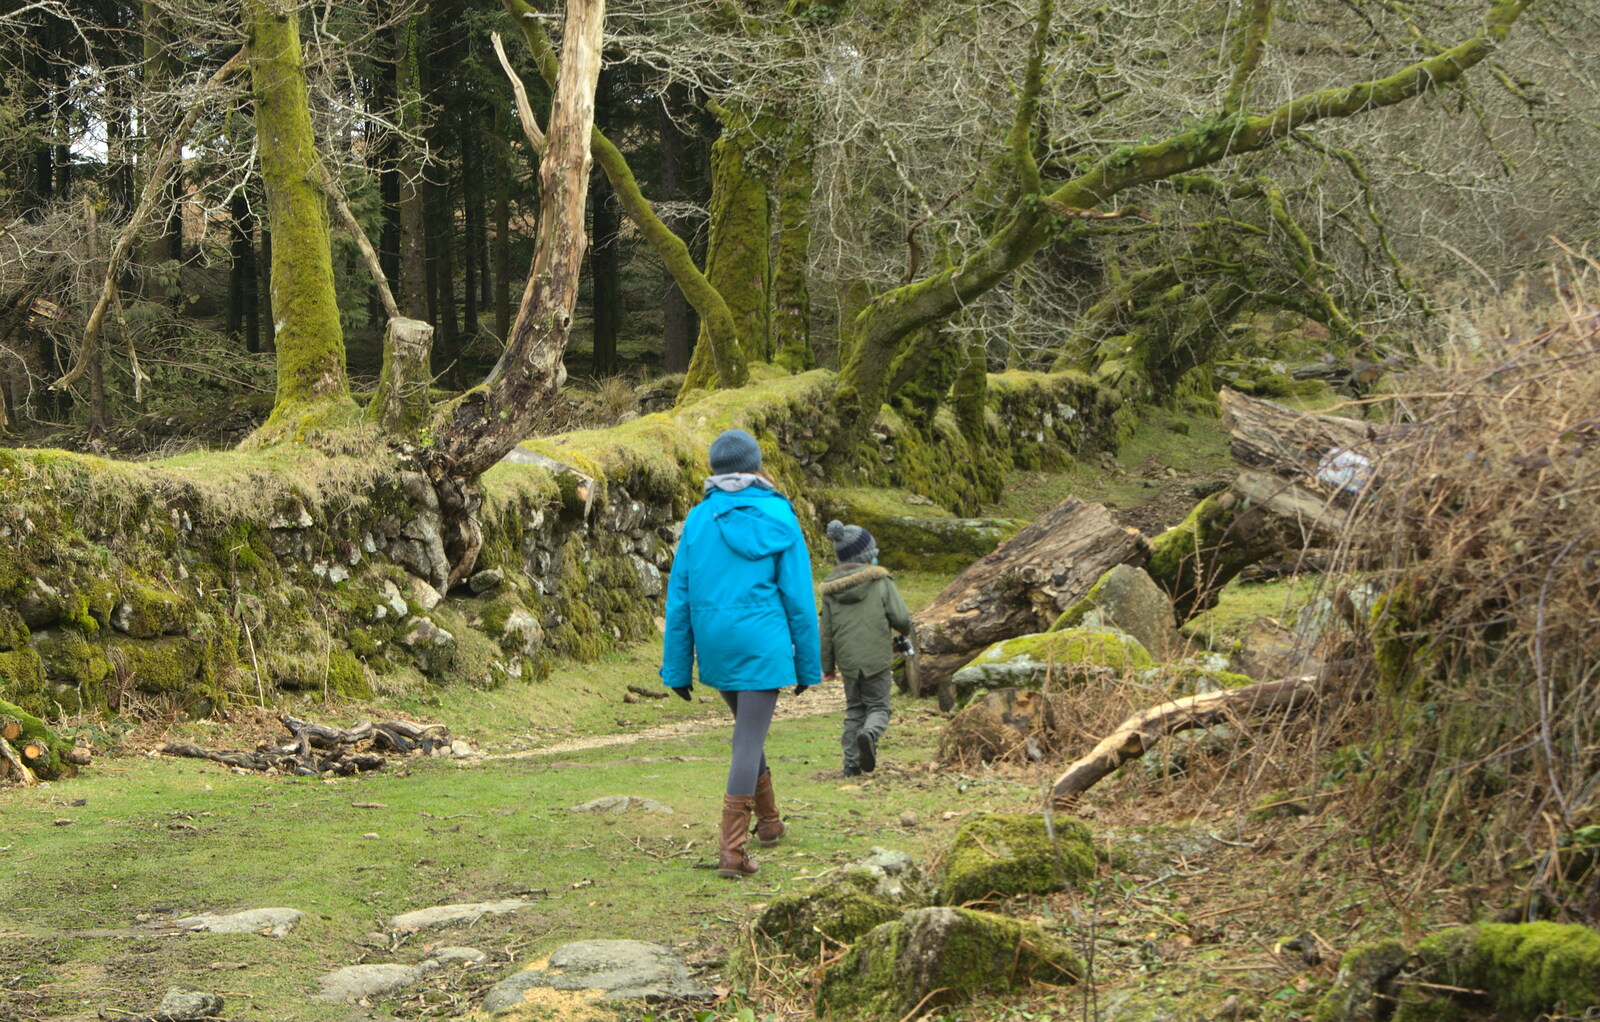 Isobel and Fred on their way up to Sheepstor from A Trip to Grandma J's, Spreyton, Devon - 18th February 2015